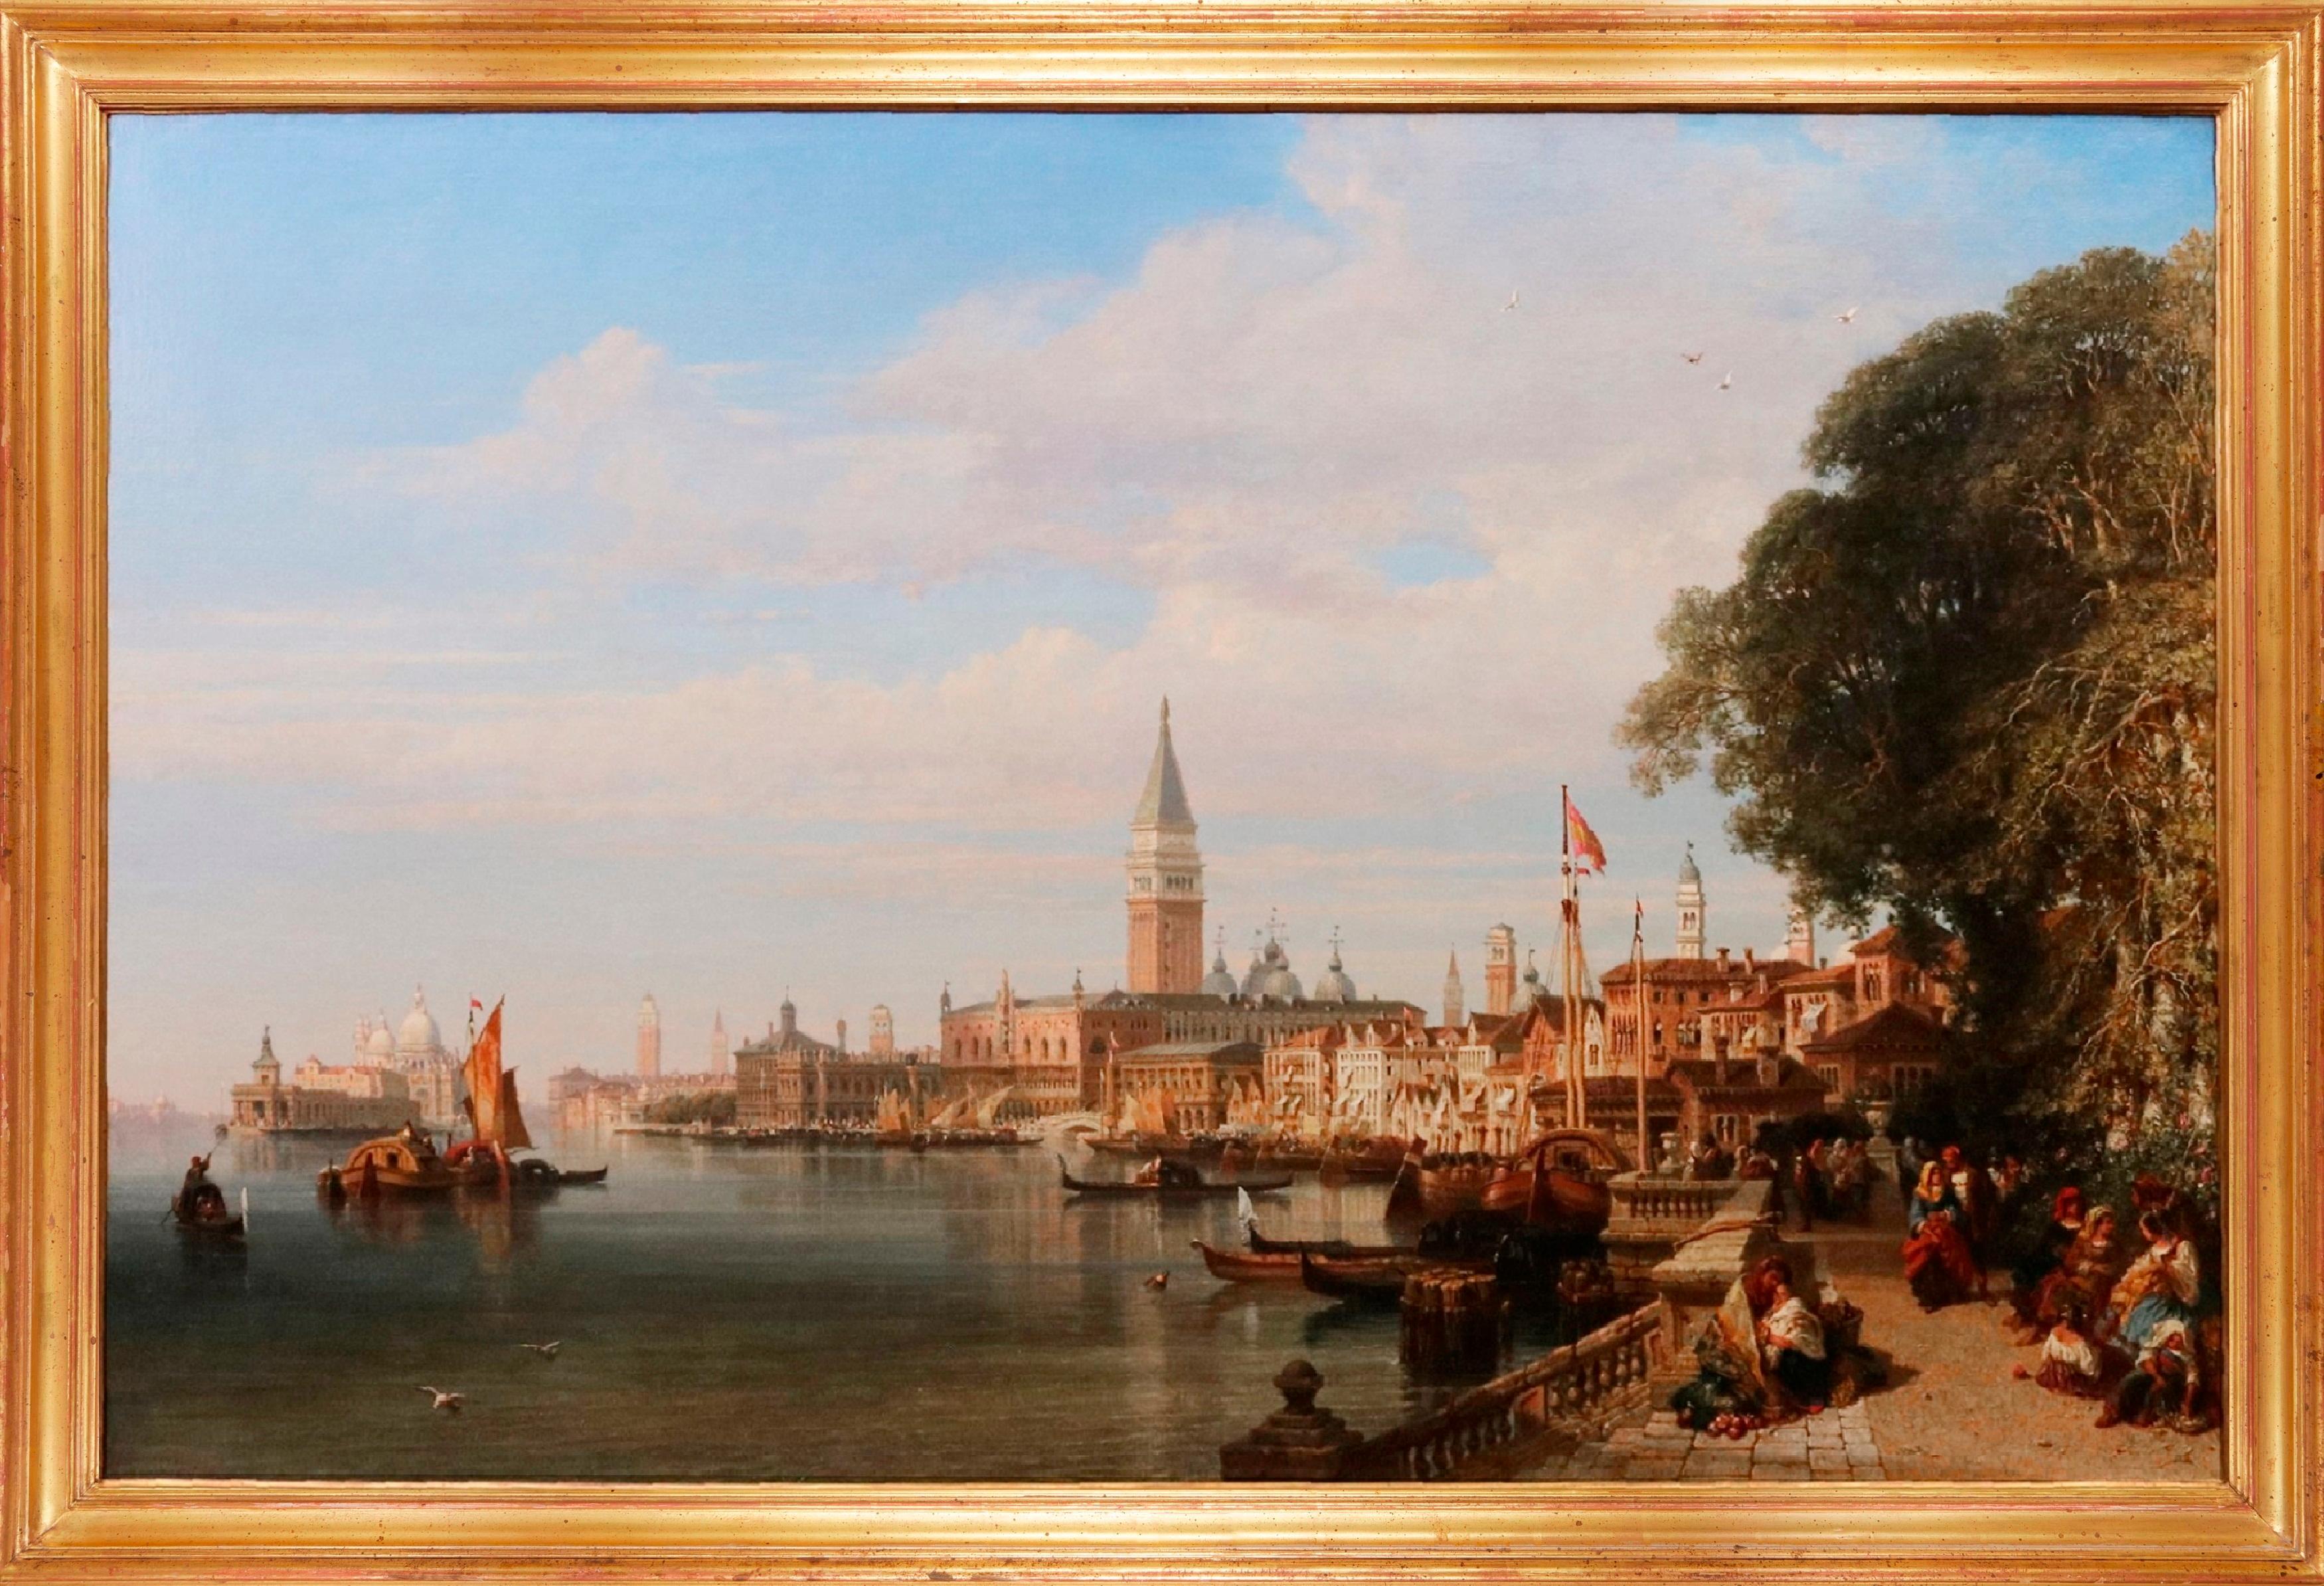 ‘The Waterfront, Venice’ by William Wyld R.I. (1806-1889).

The painting – which depicts a panoramic view of the Palazzo Ducale, the campanile of St. Mark’s, Punta della Dogana and Santa Maria della Salute in the Italian city of Venice – is signed